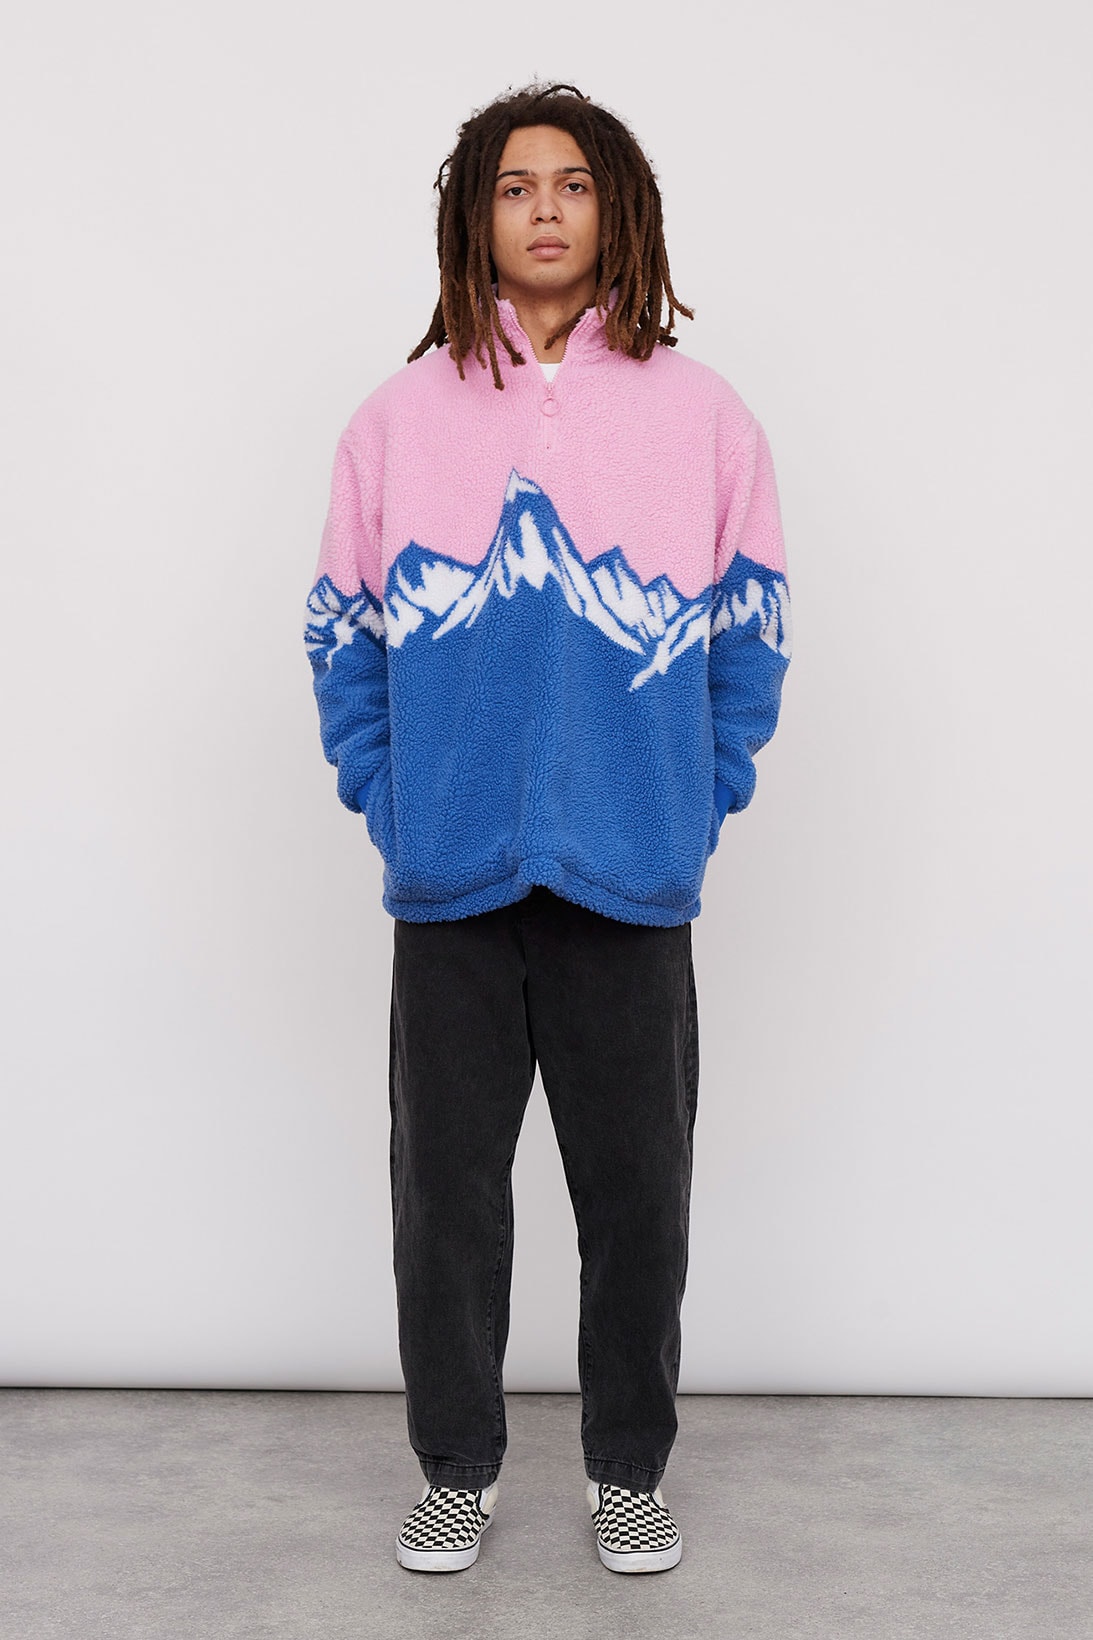 Lazy Oaf Take A Hike Outdoor Hiking Collection Lookbook Mountain Pink Blue Fleece Jumper